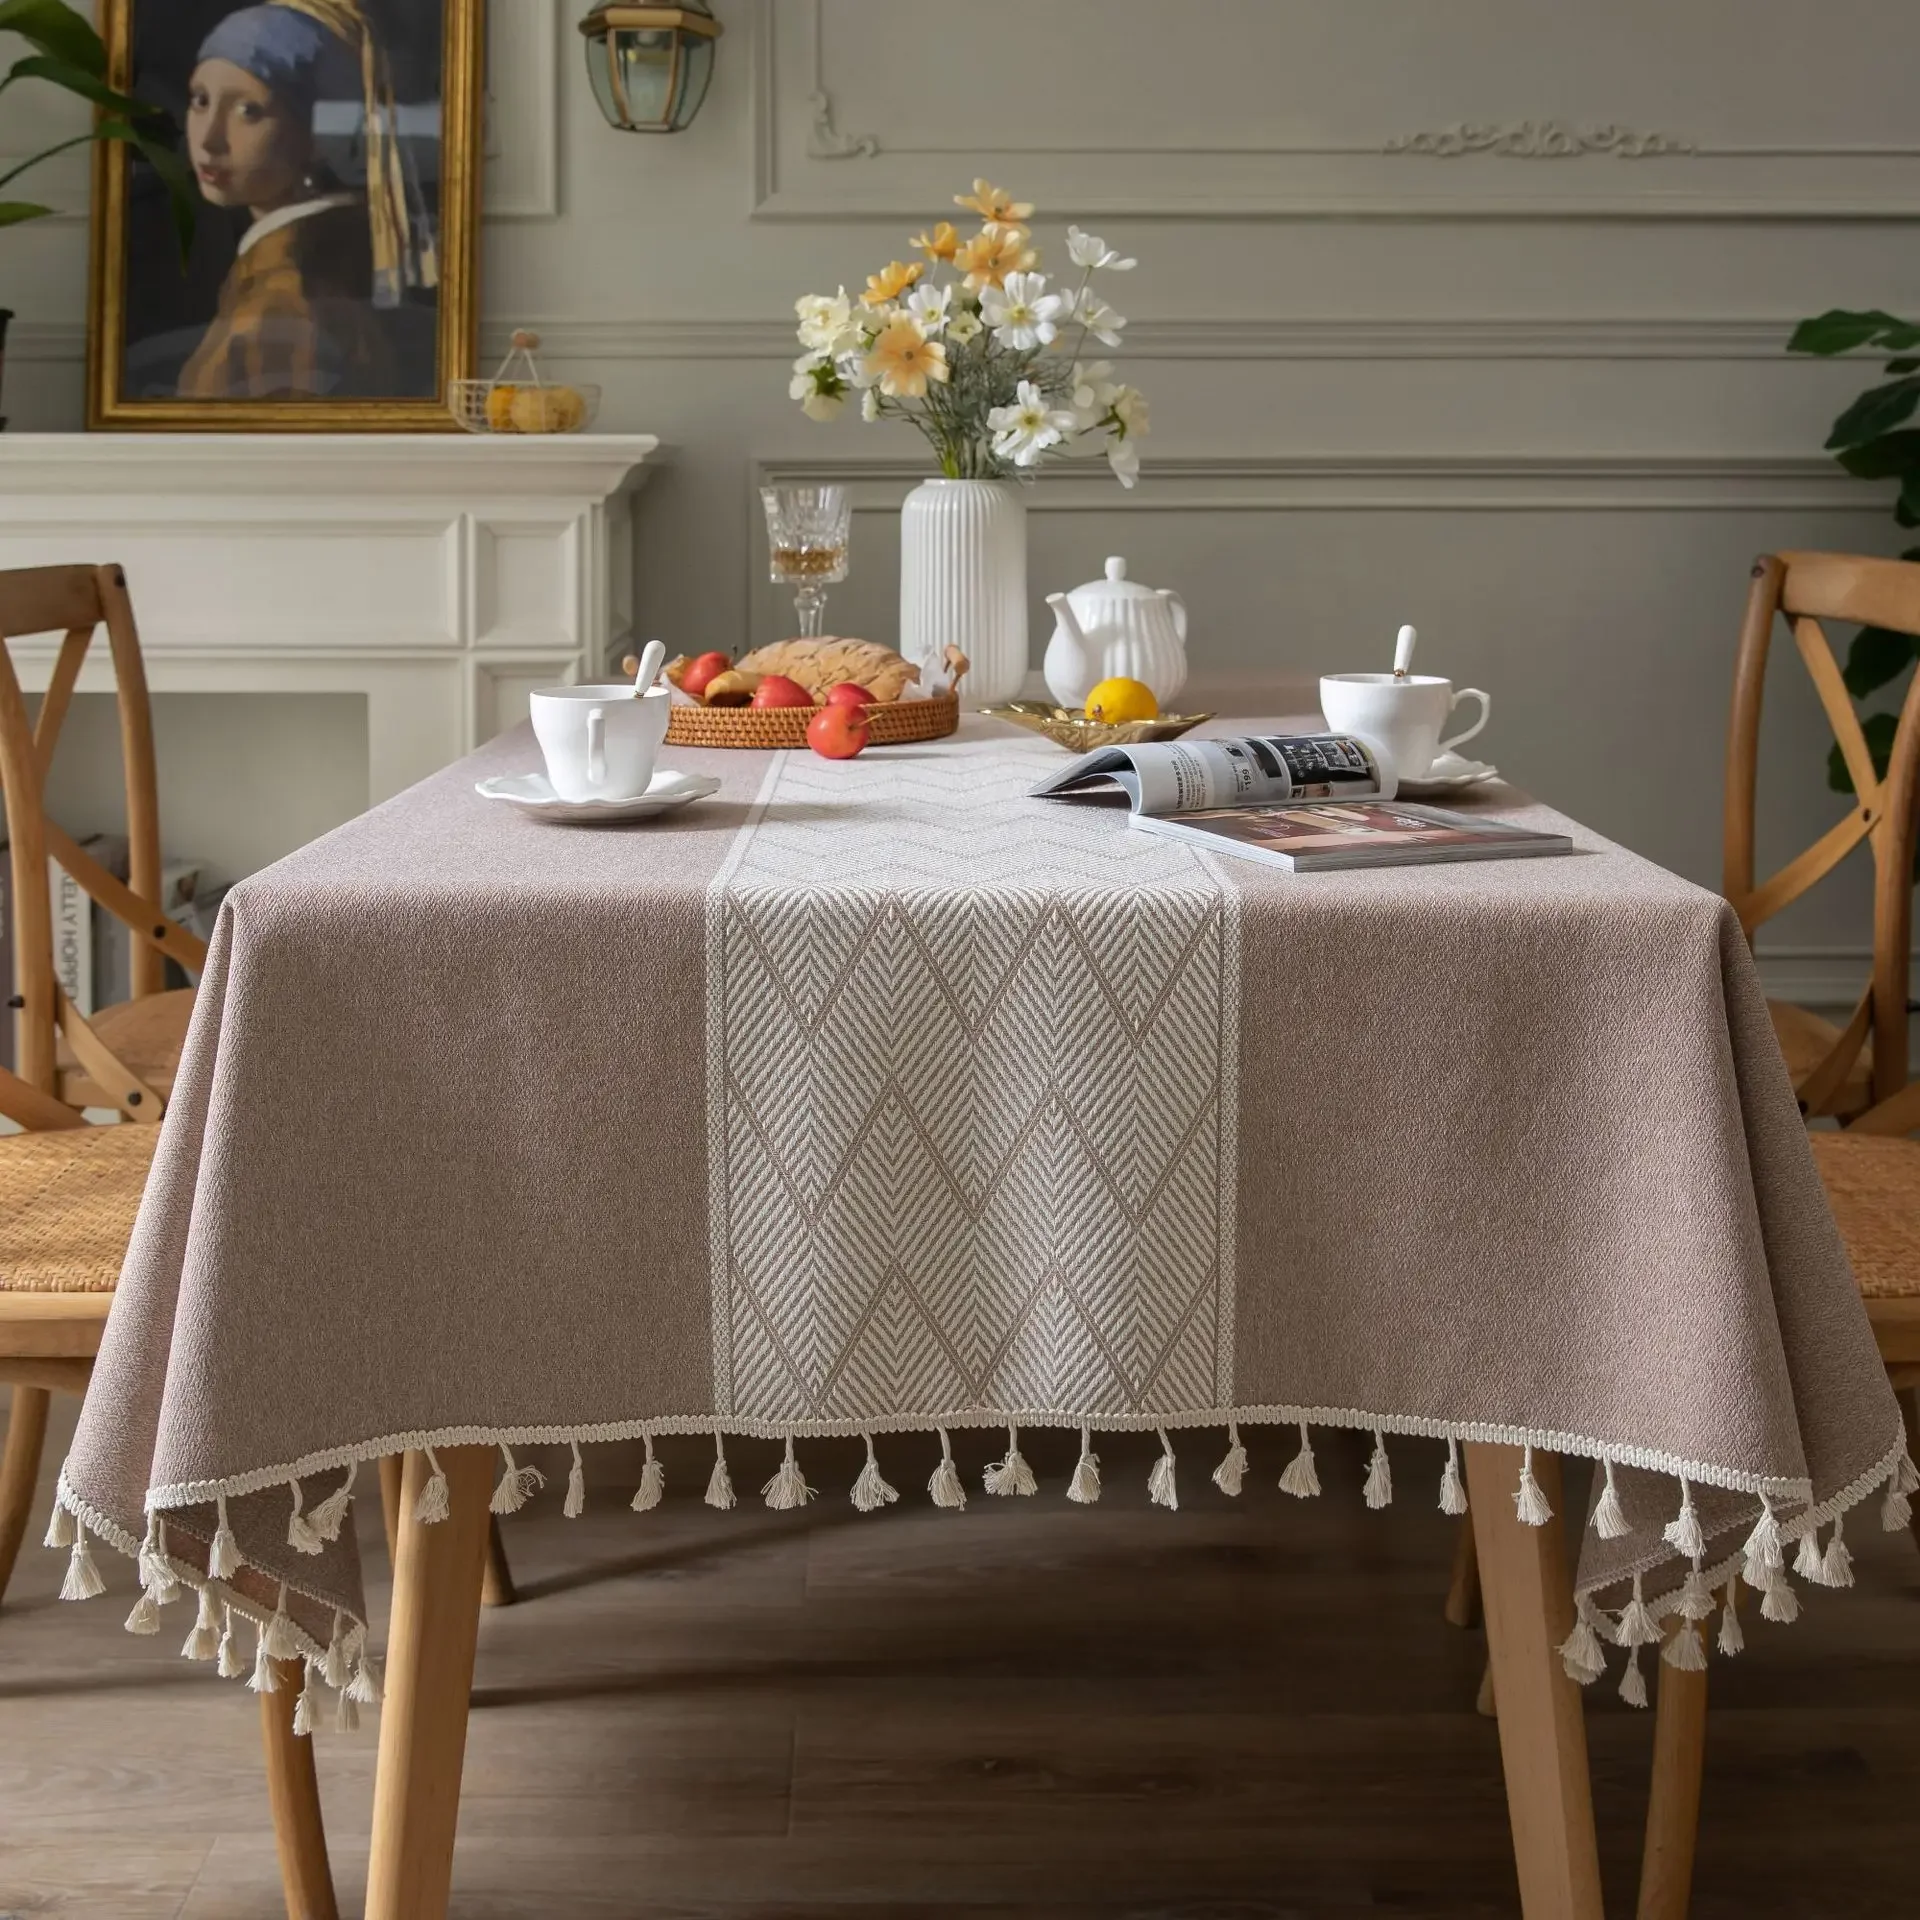 

Christmas Jacquard Tablecloth Table Cloth Japanese Imitation Cotton Linen Elk Geometry Tablecloths Home Party Dining Table Cover